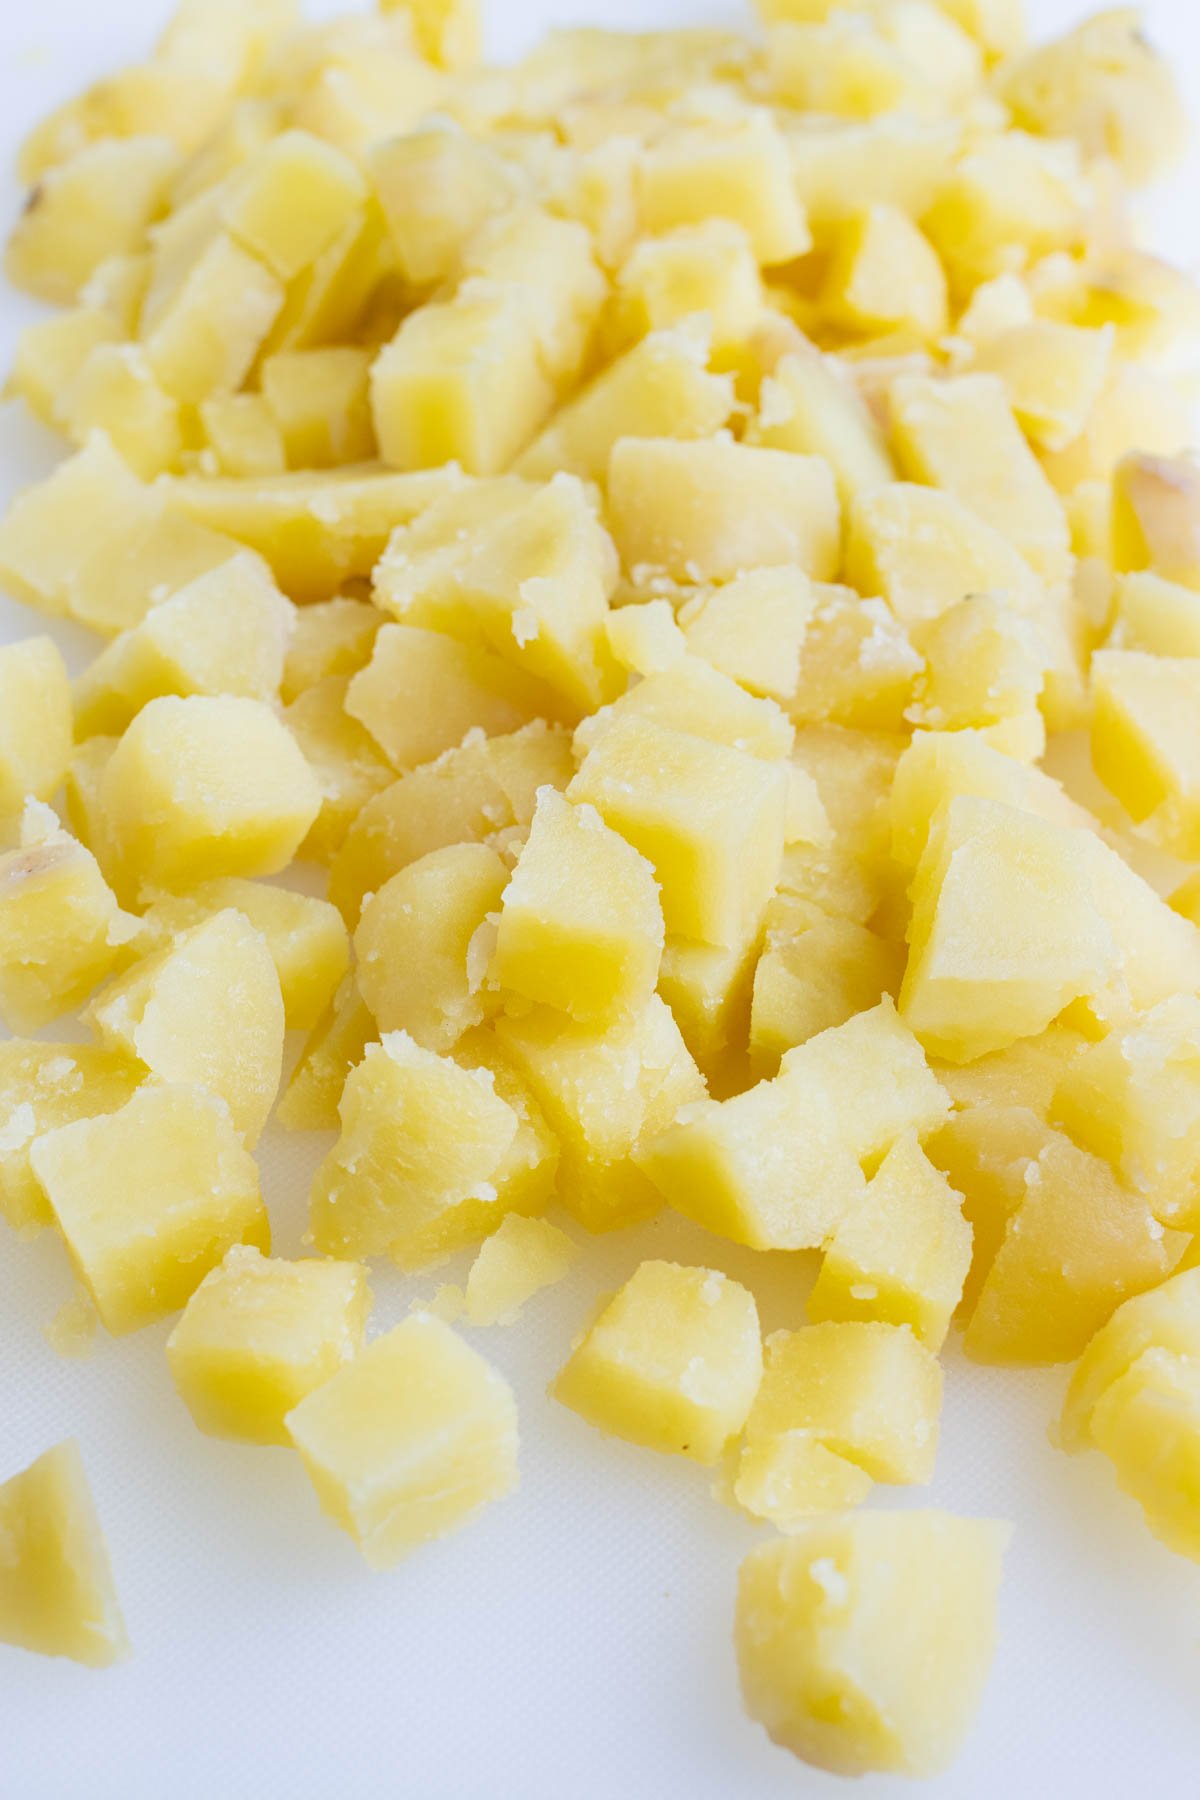 Potatoes are diced into small cubes.